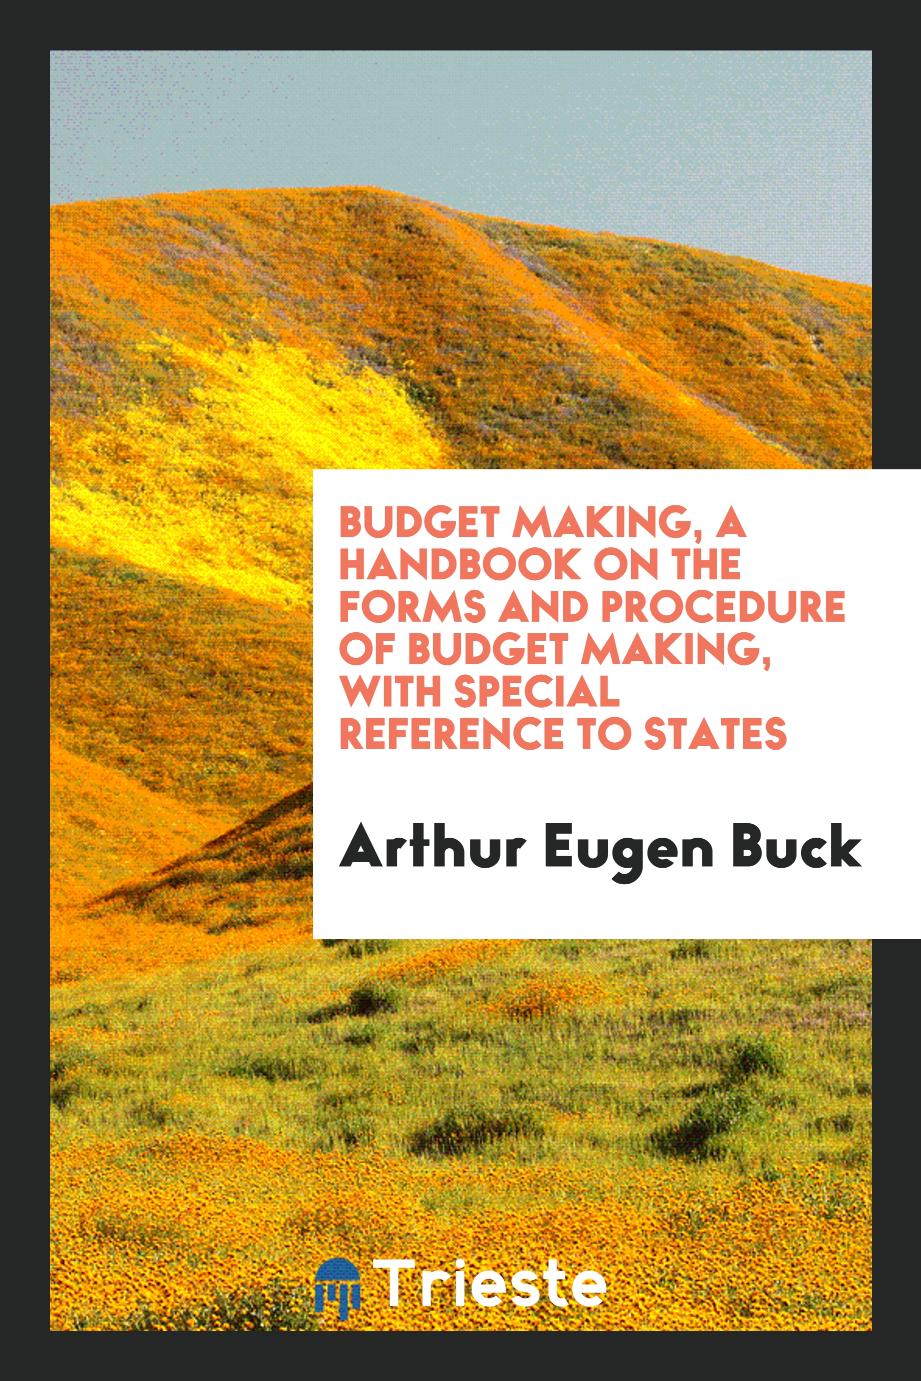 Budget making, a handbook on the forms and procedure of budget making, with special reference to states